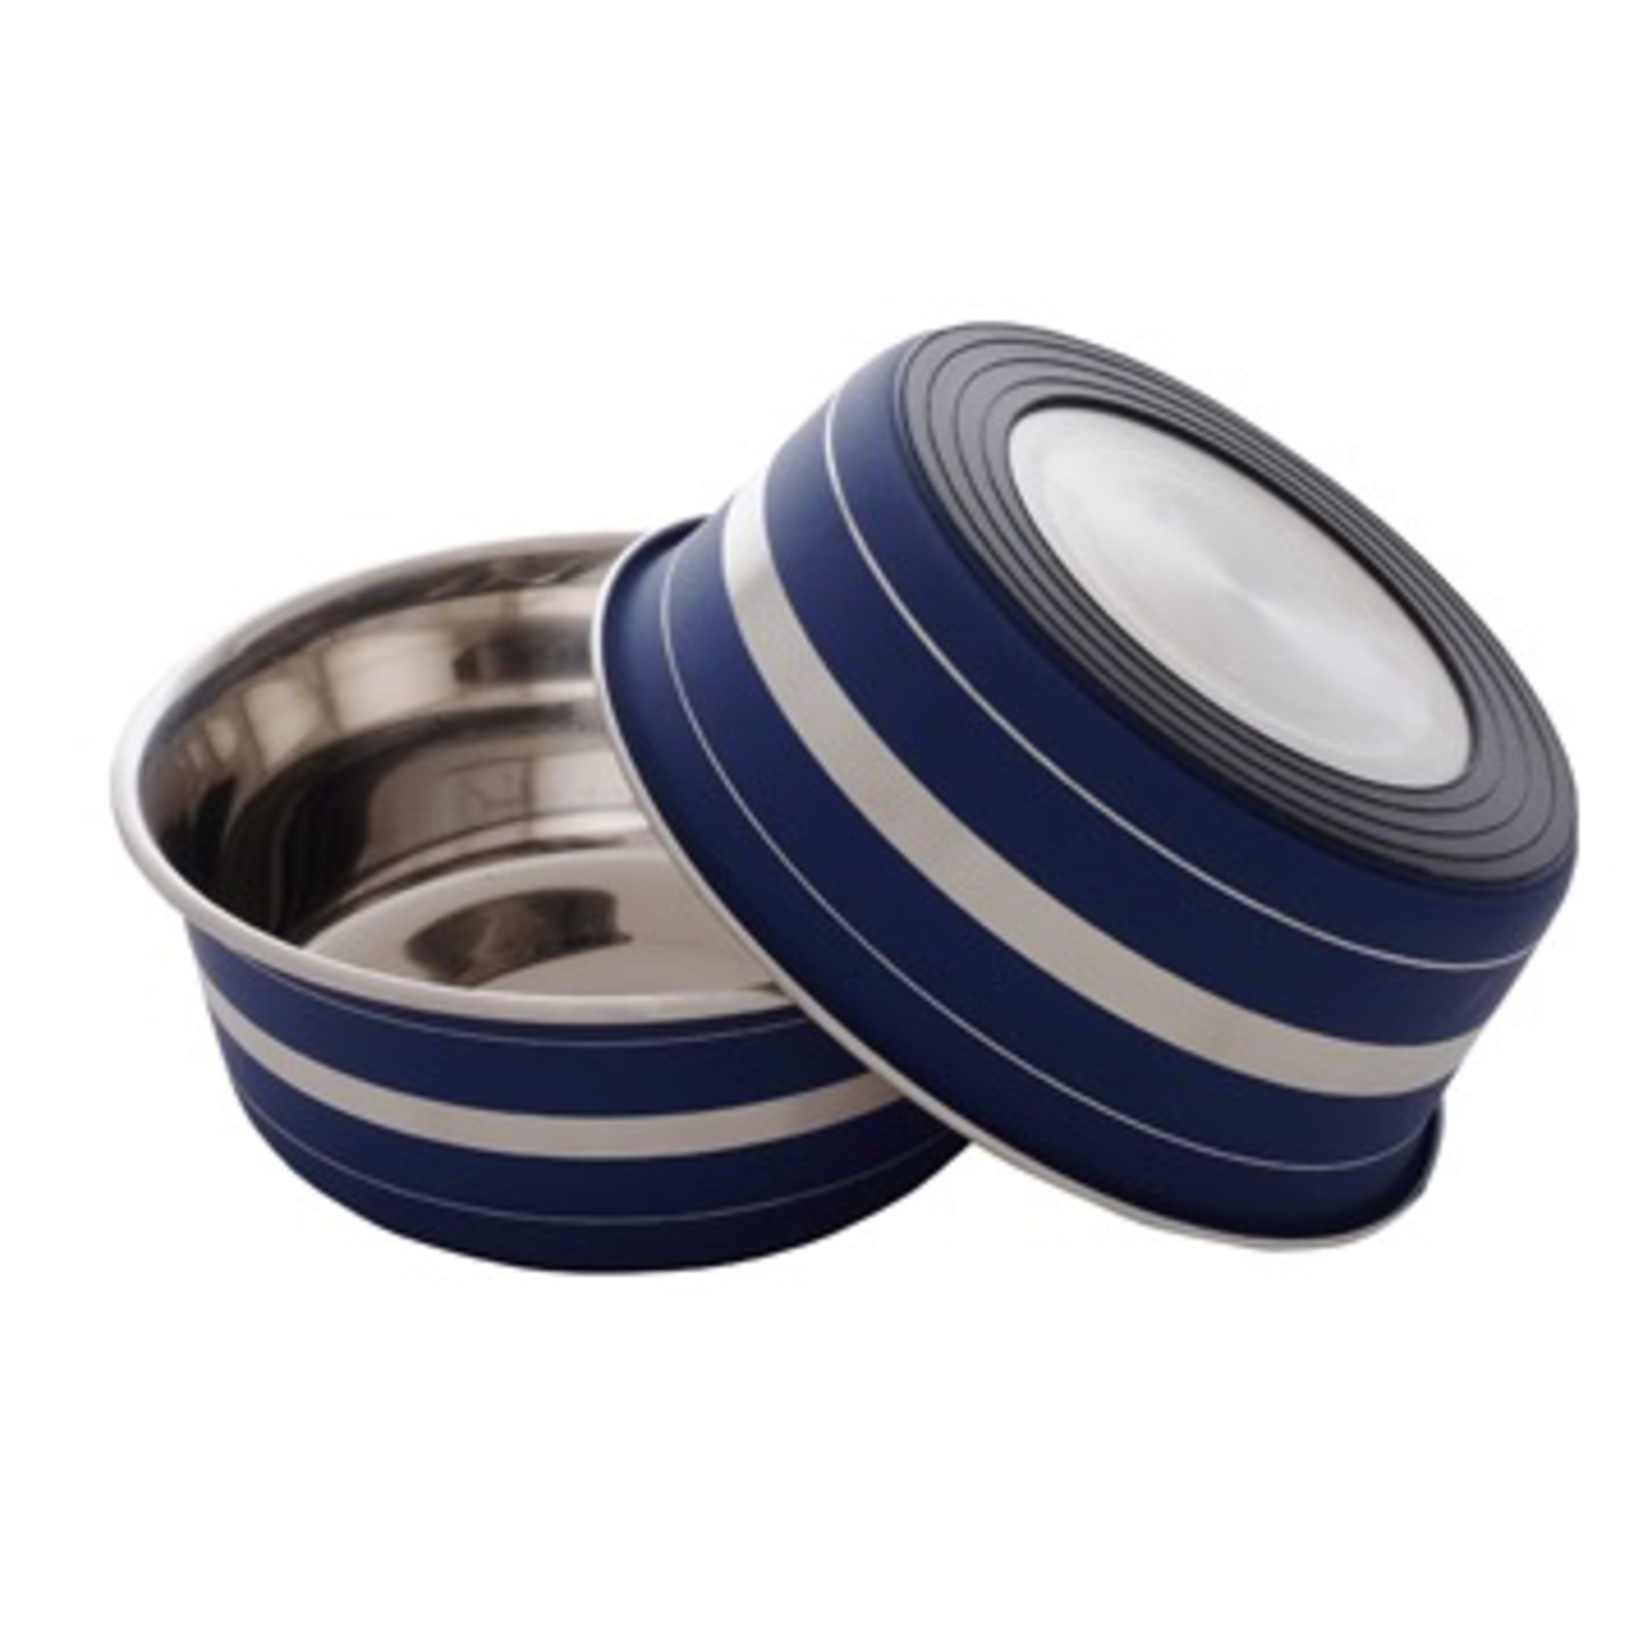 DOG IT (W) Dogit Stainless Steel Deluxe Non-Skid Bowl, Blue Stripe, 1150 ml